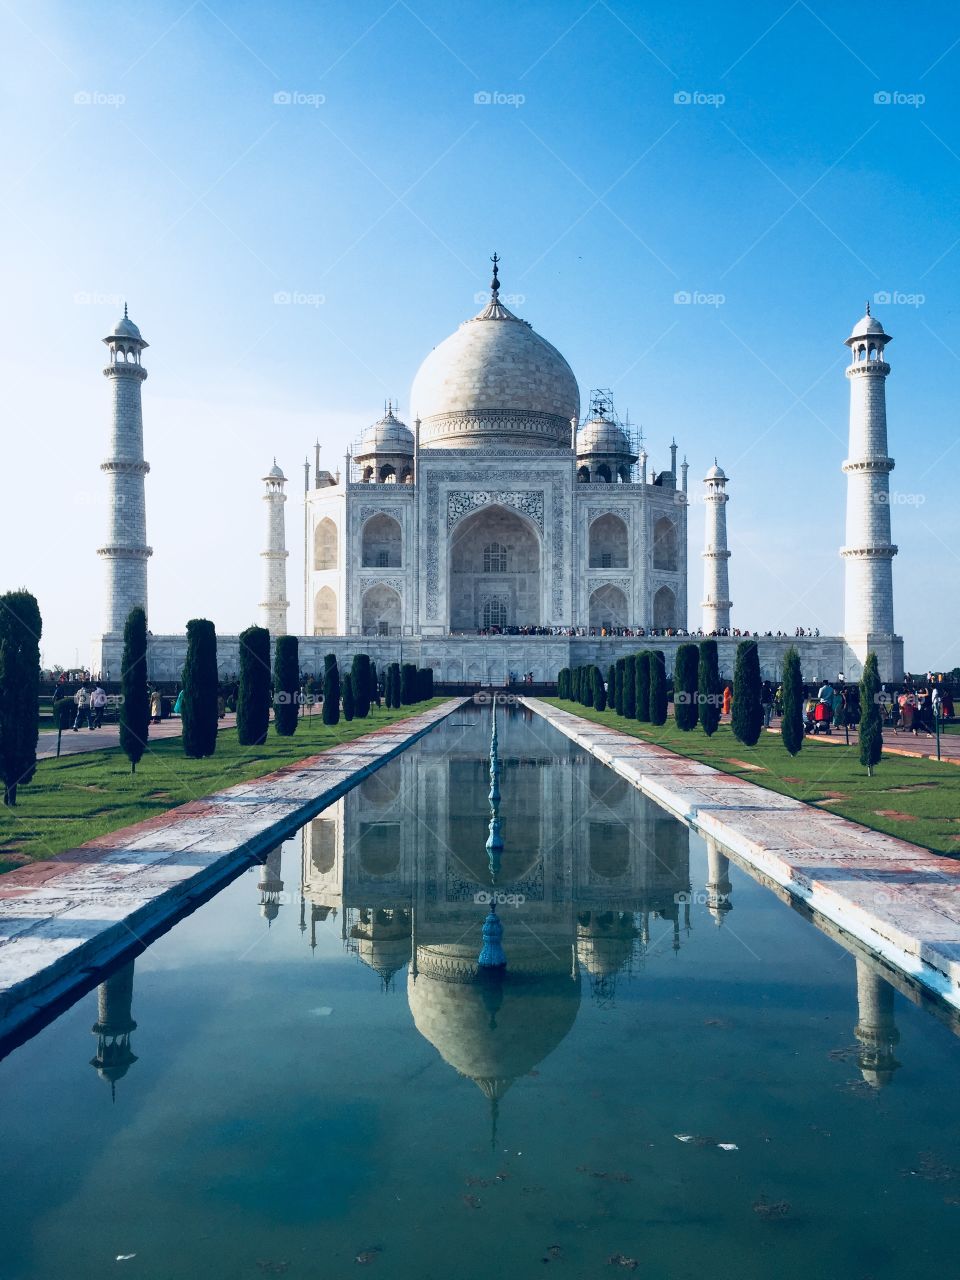 Taj Mahal, love symbol, as captured in an alluring reflection. 